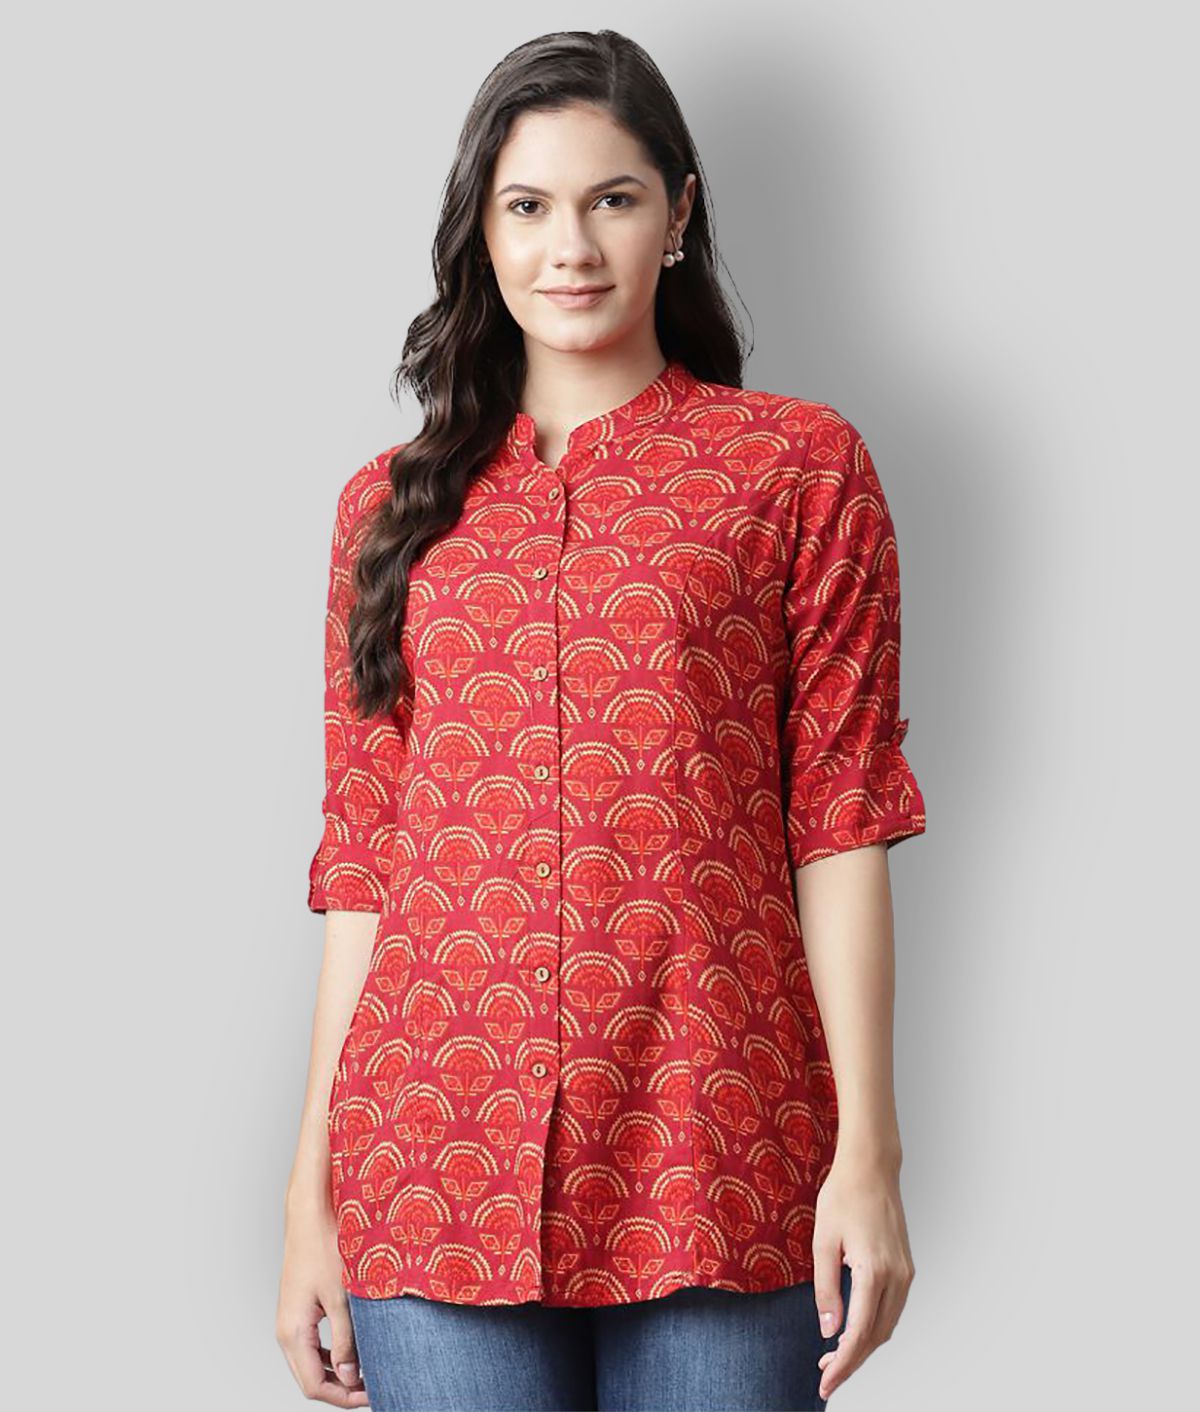     			Divena - Red Rayon Women's Tunic ( Pack of 1 )